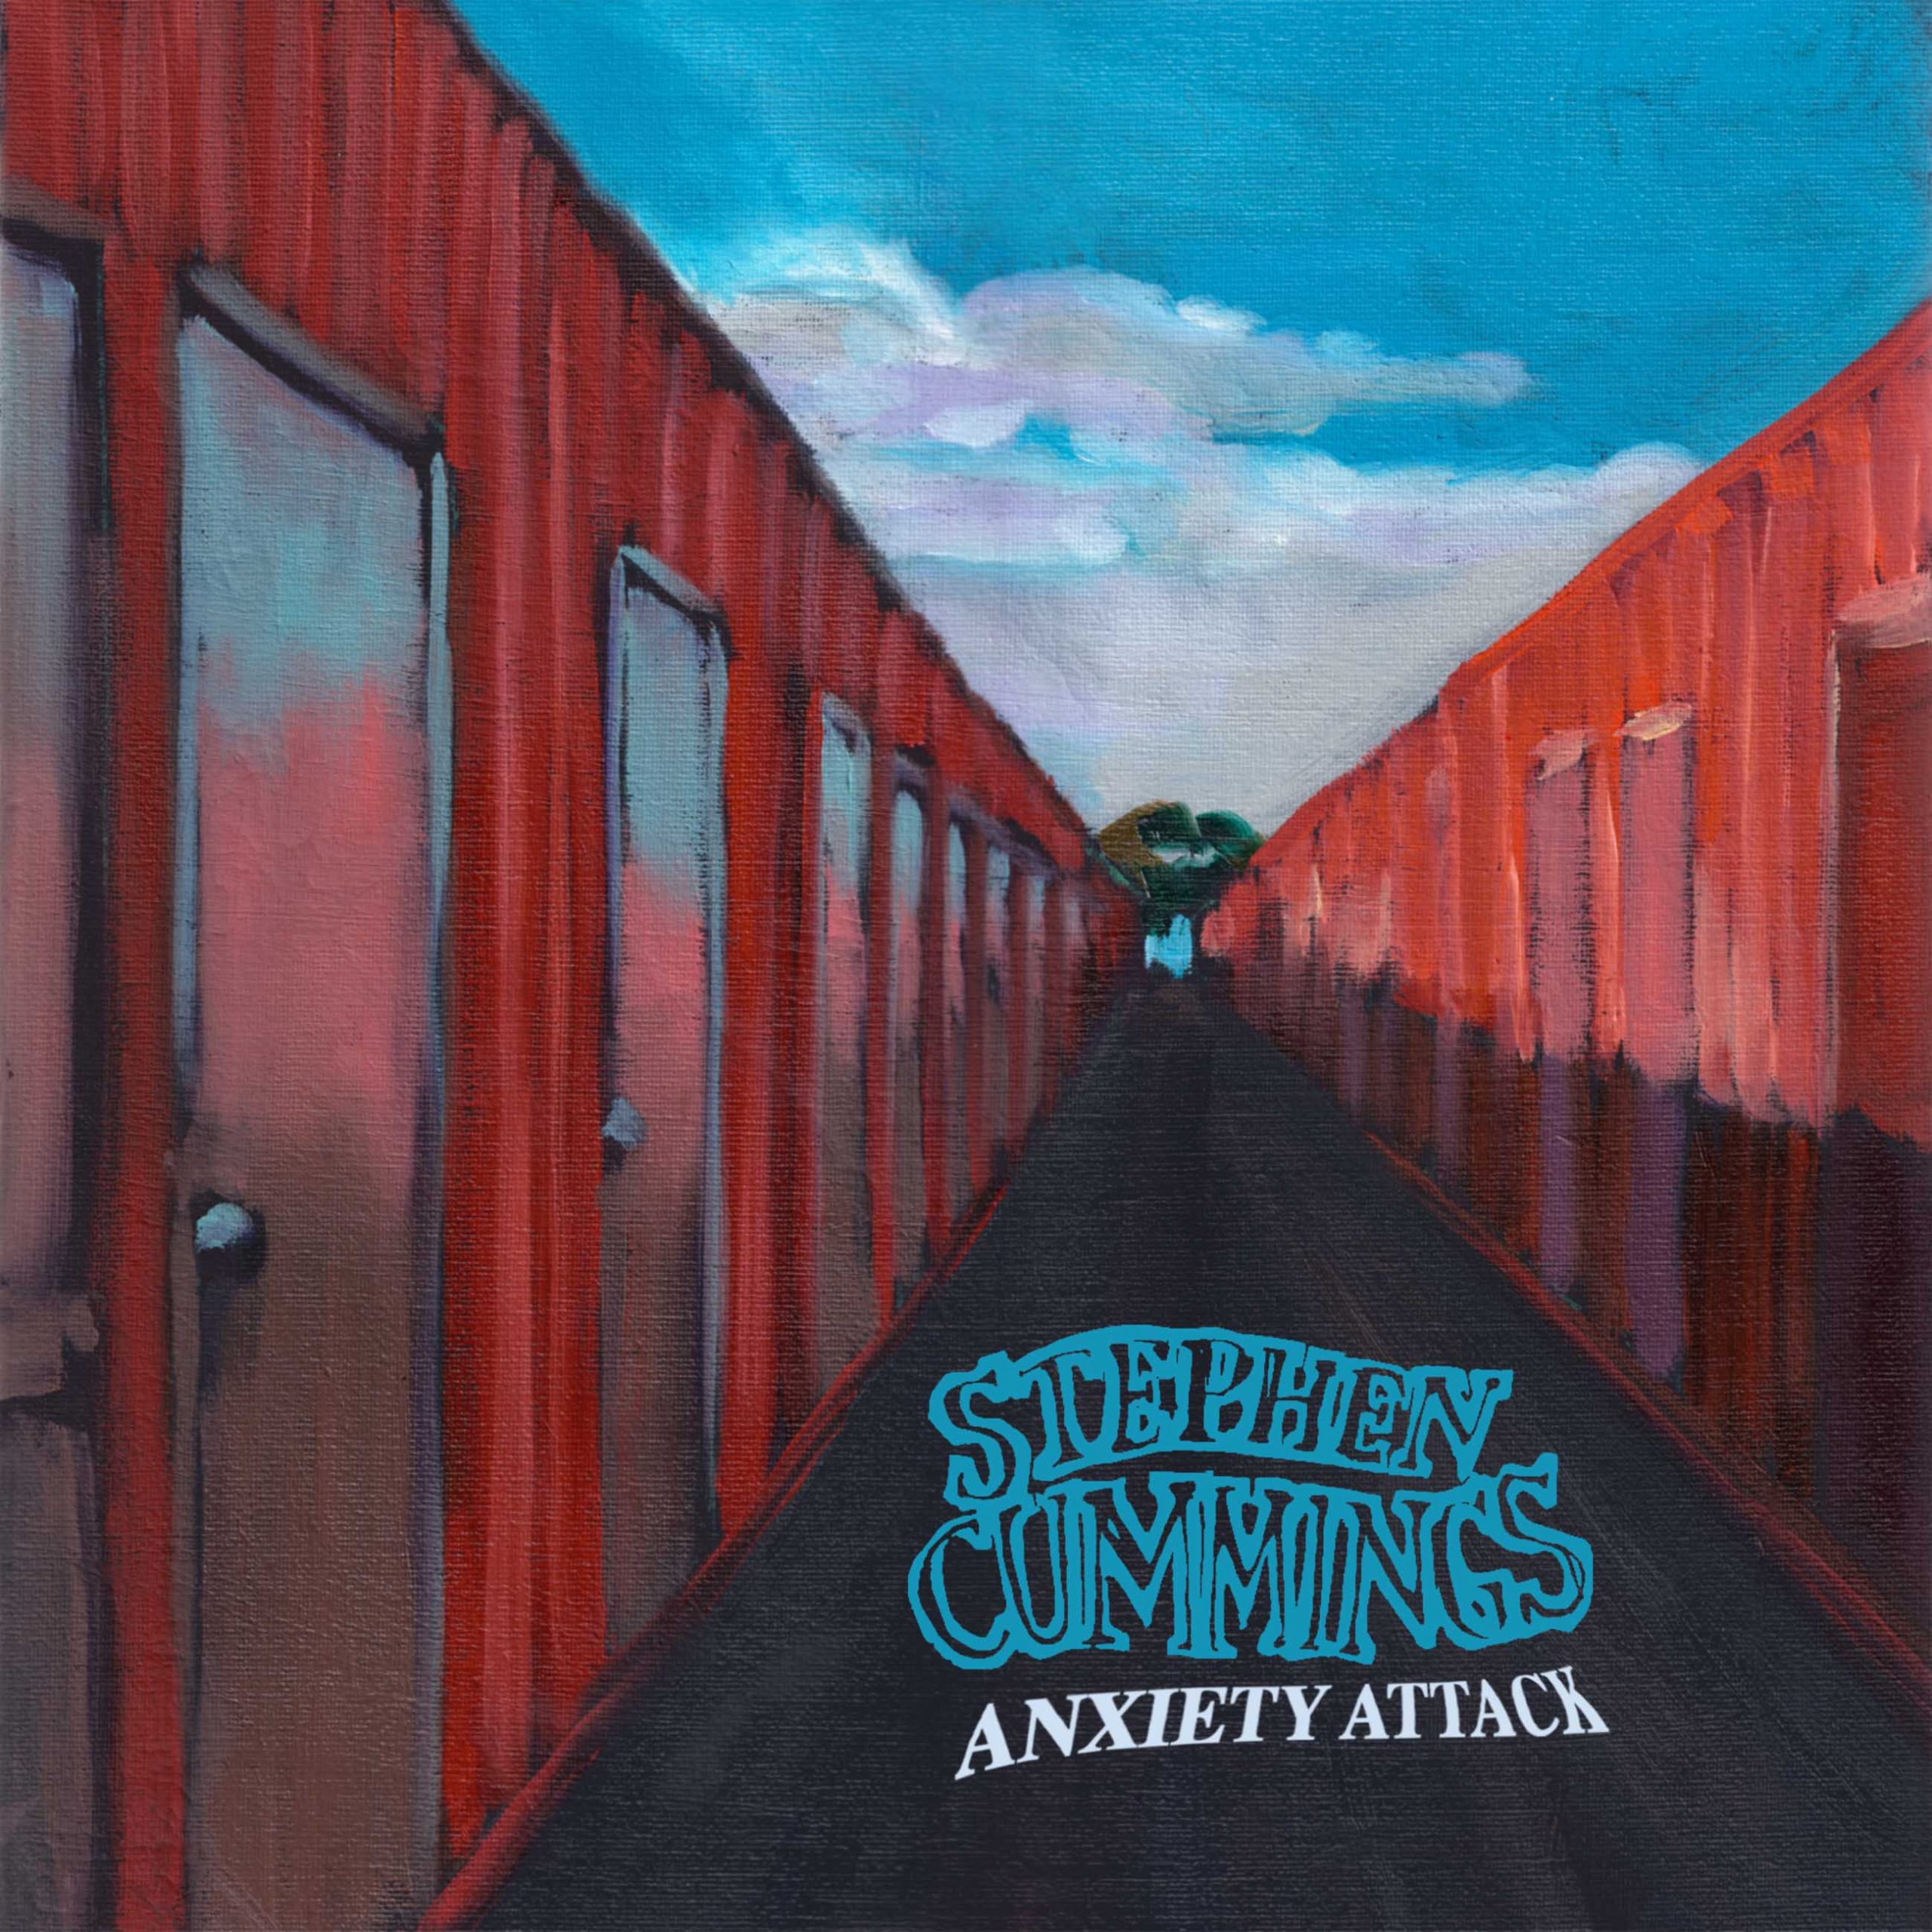 Stephen Cummings - Anxiety Attack (extended version)